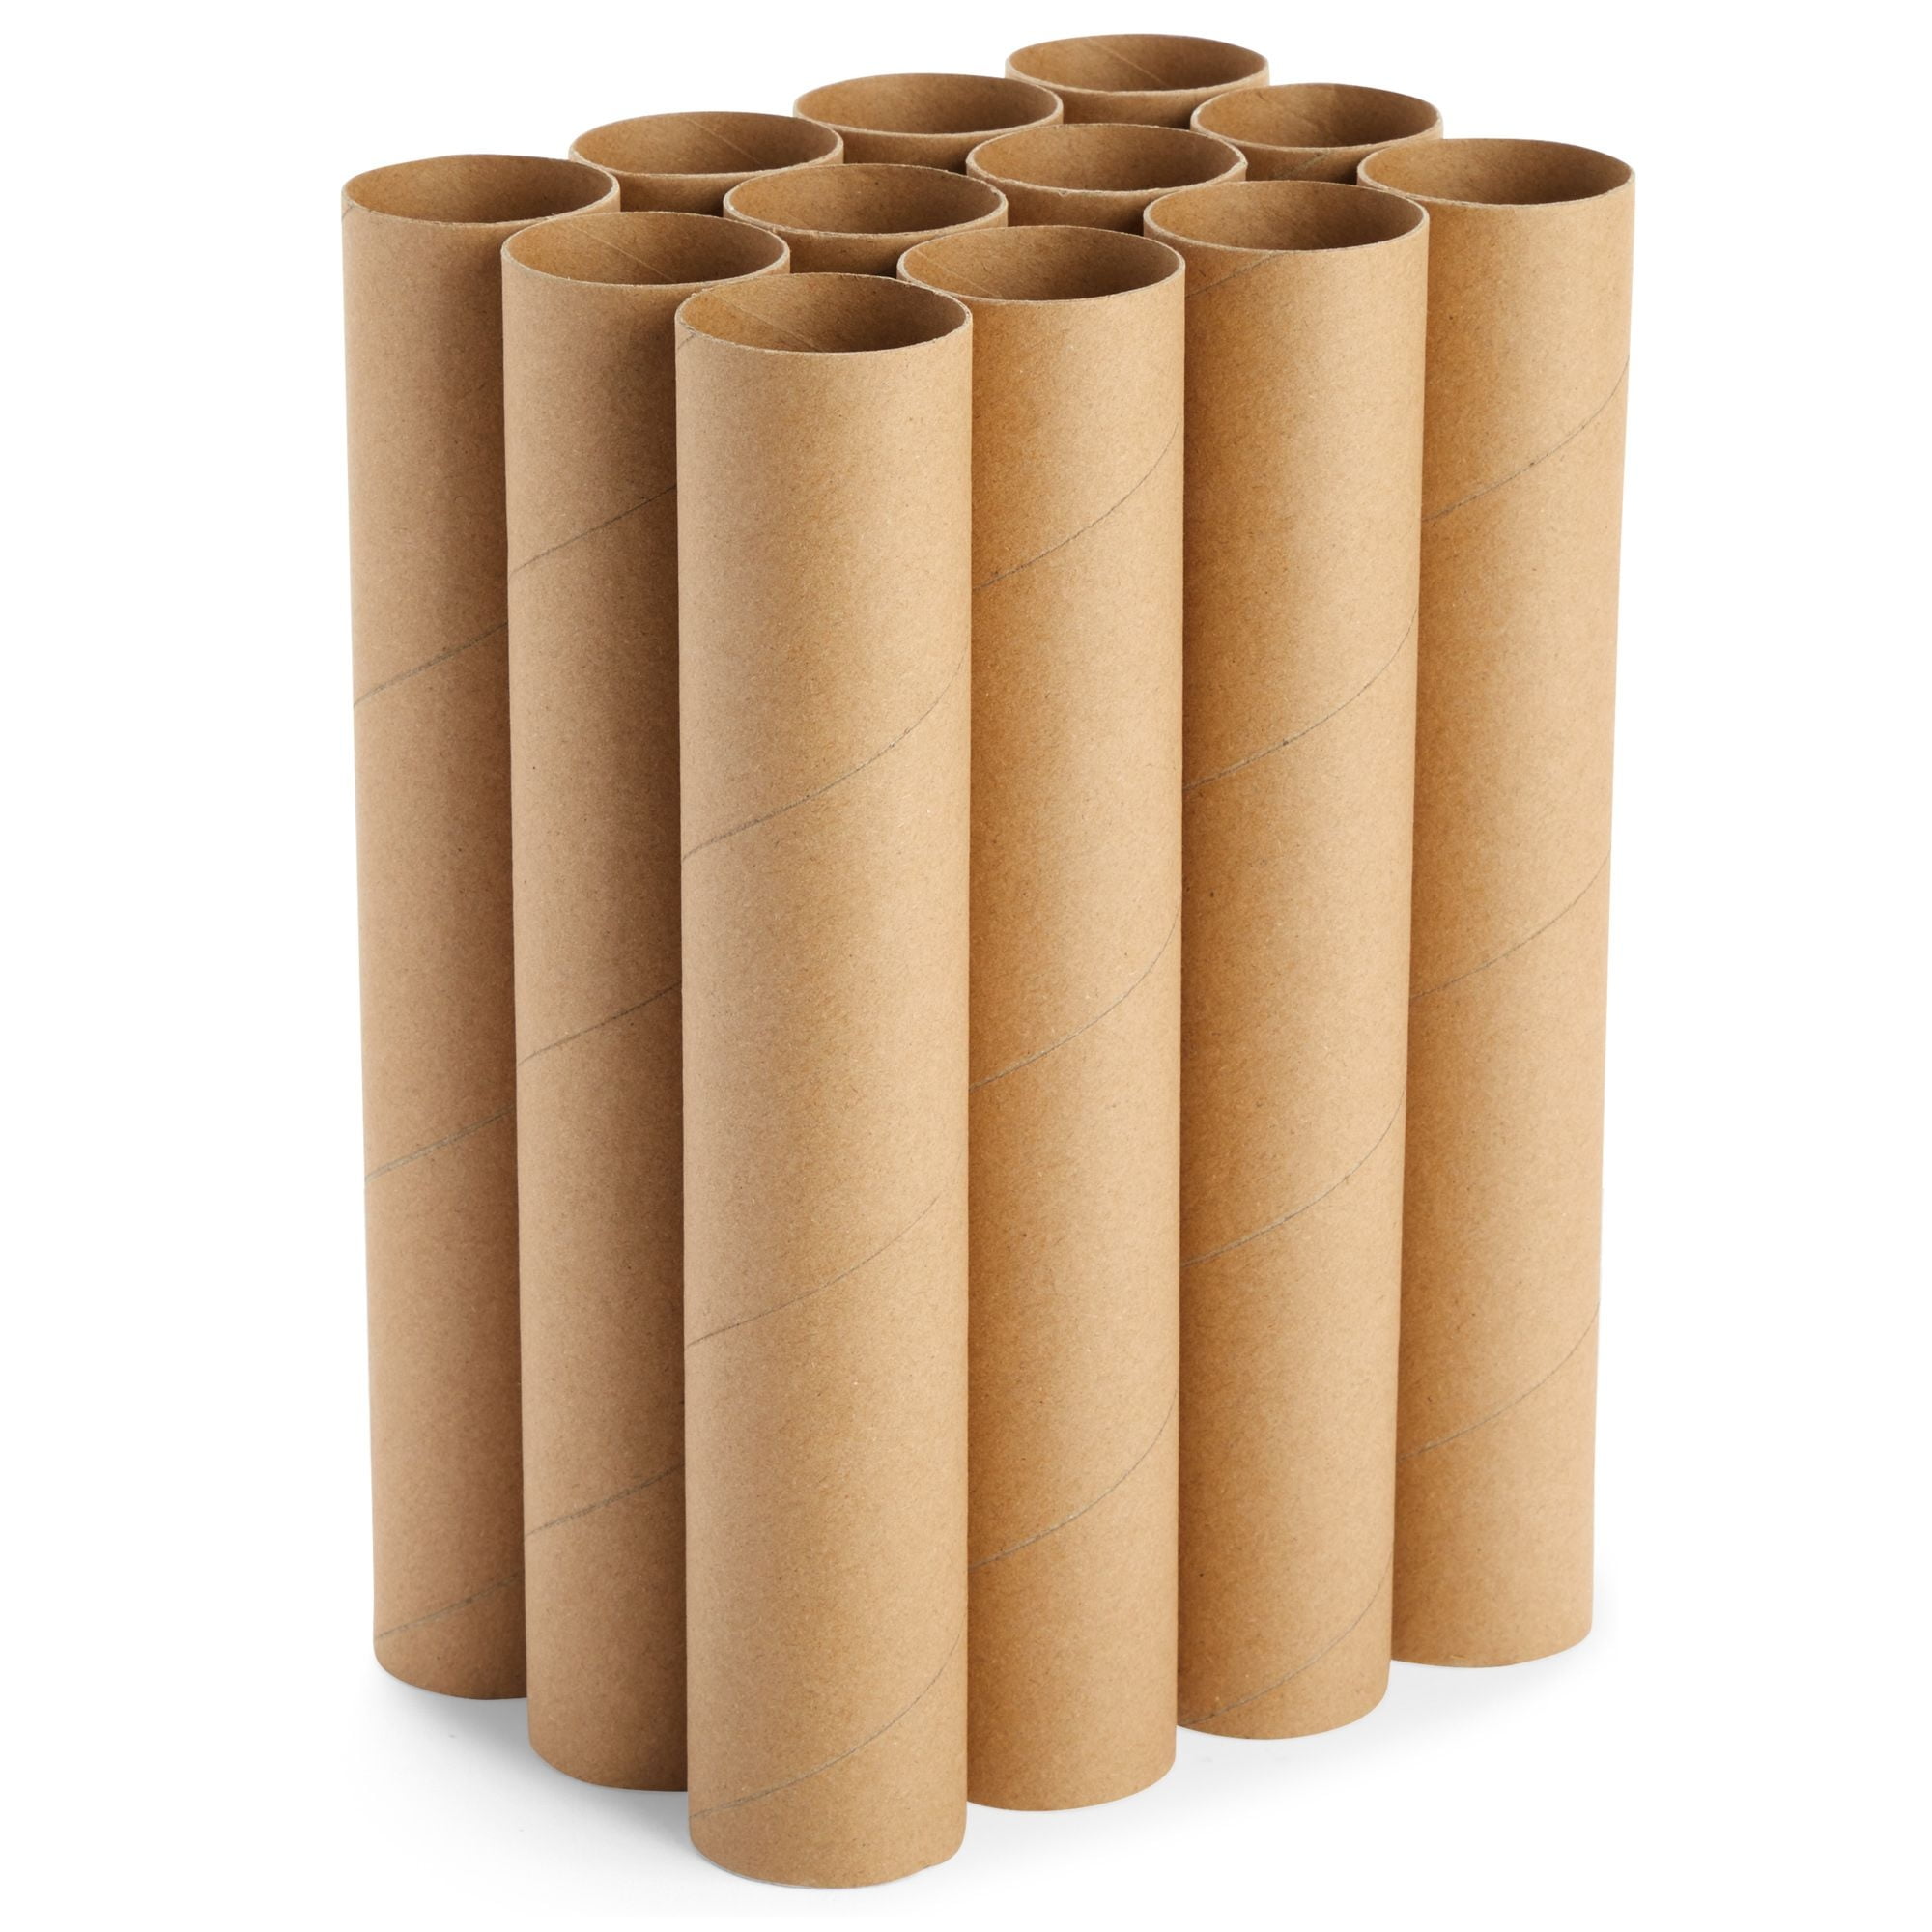 12 Pack Cardboard Tubes for Crafts, Brown Rolls for DIY Projects, Classroom  (1.75 x 10 In)